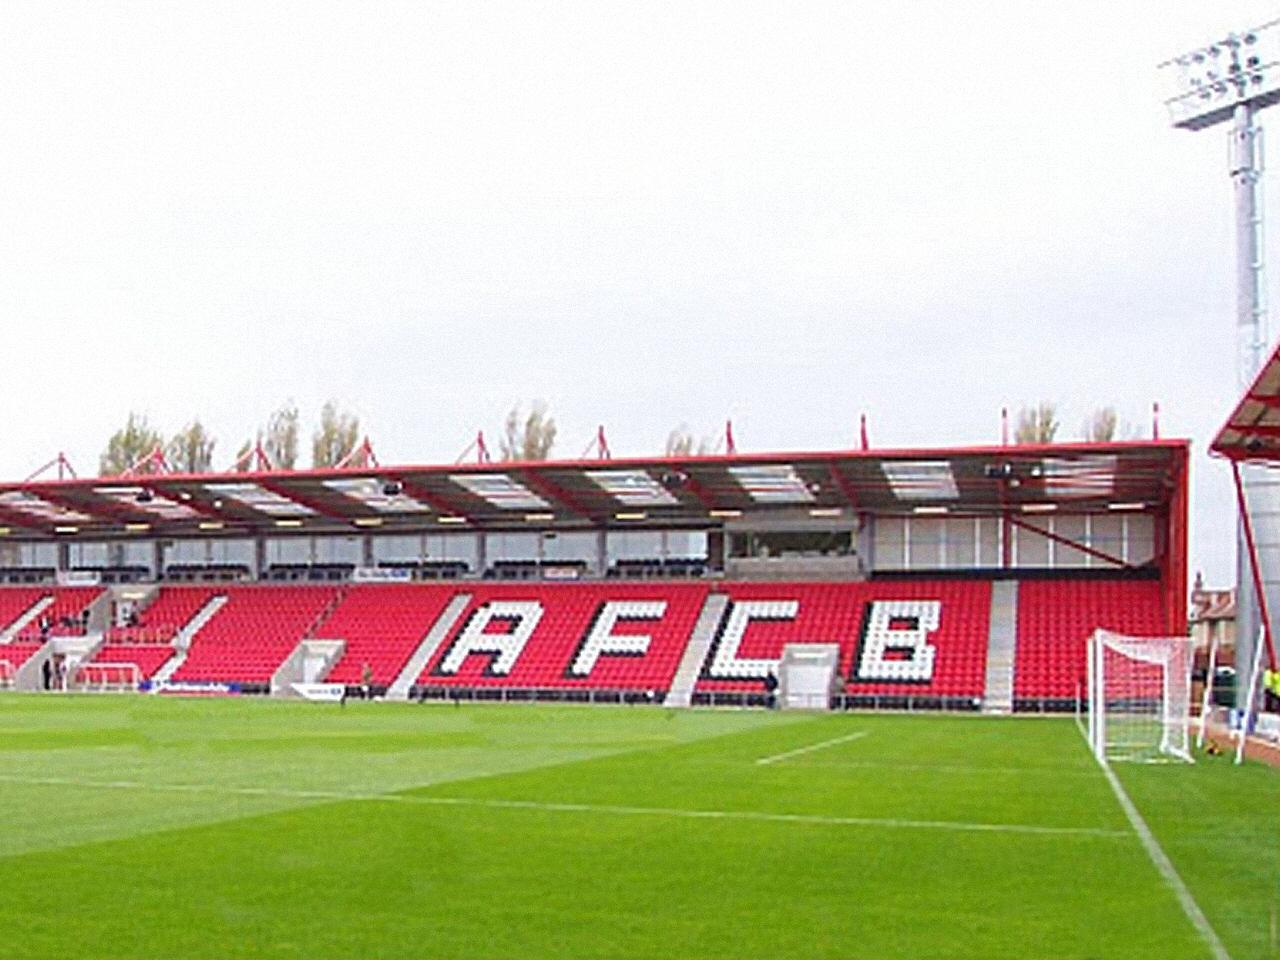 This match will take place at Bournemouth's Vitality Stadium